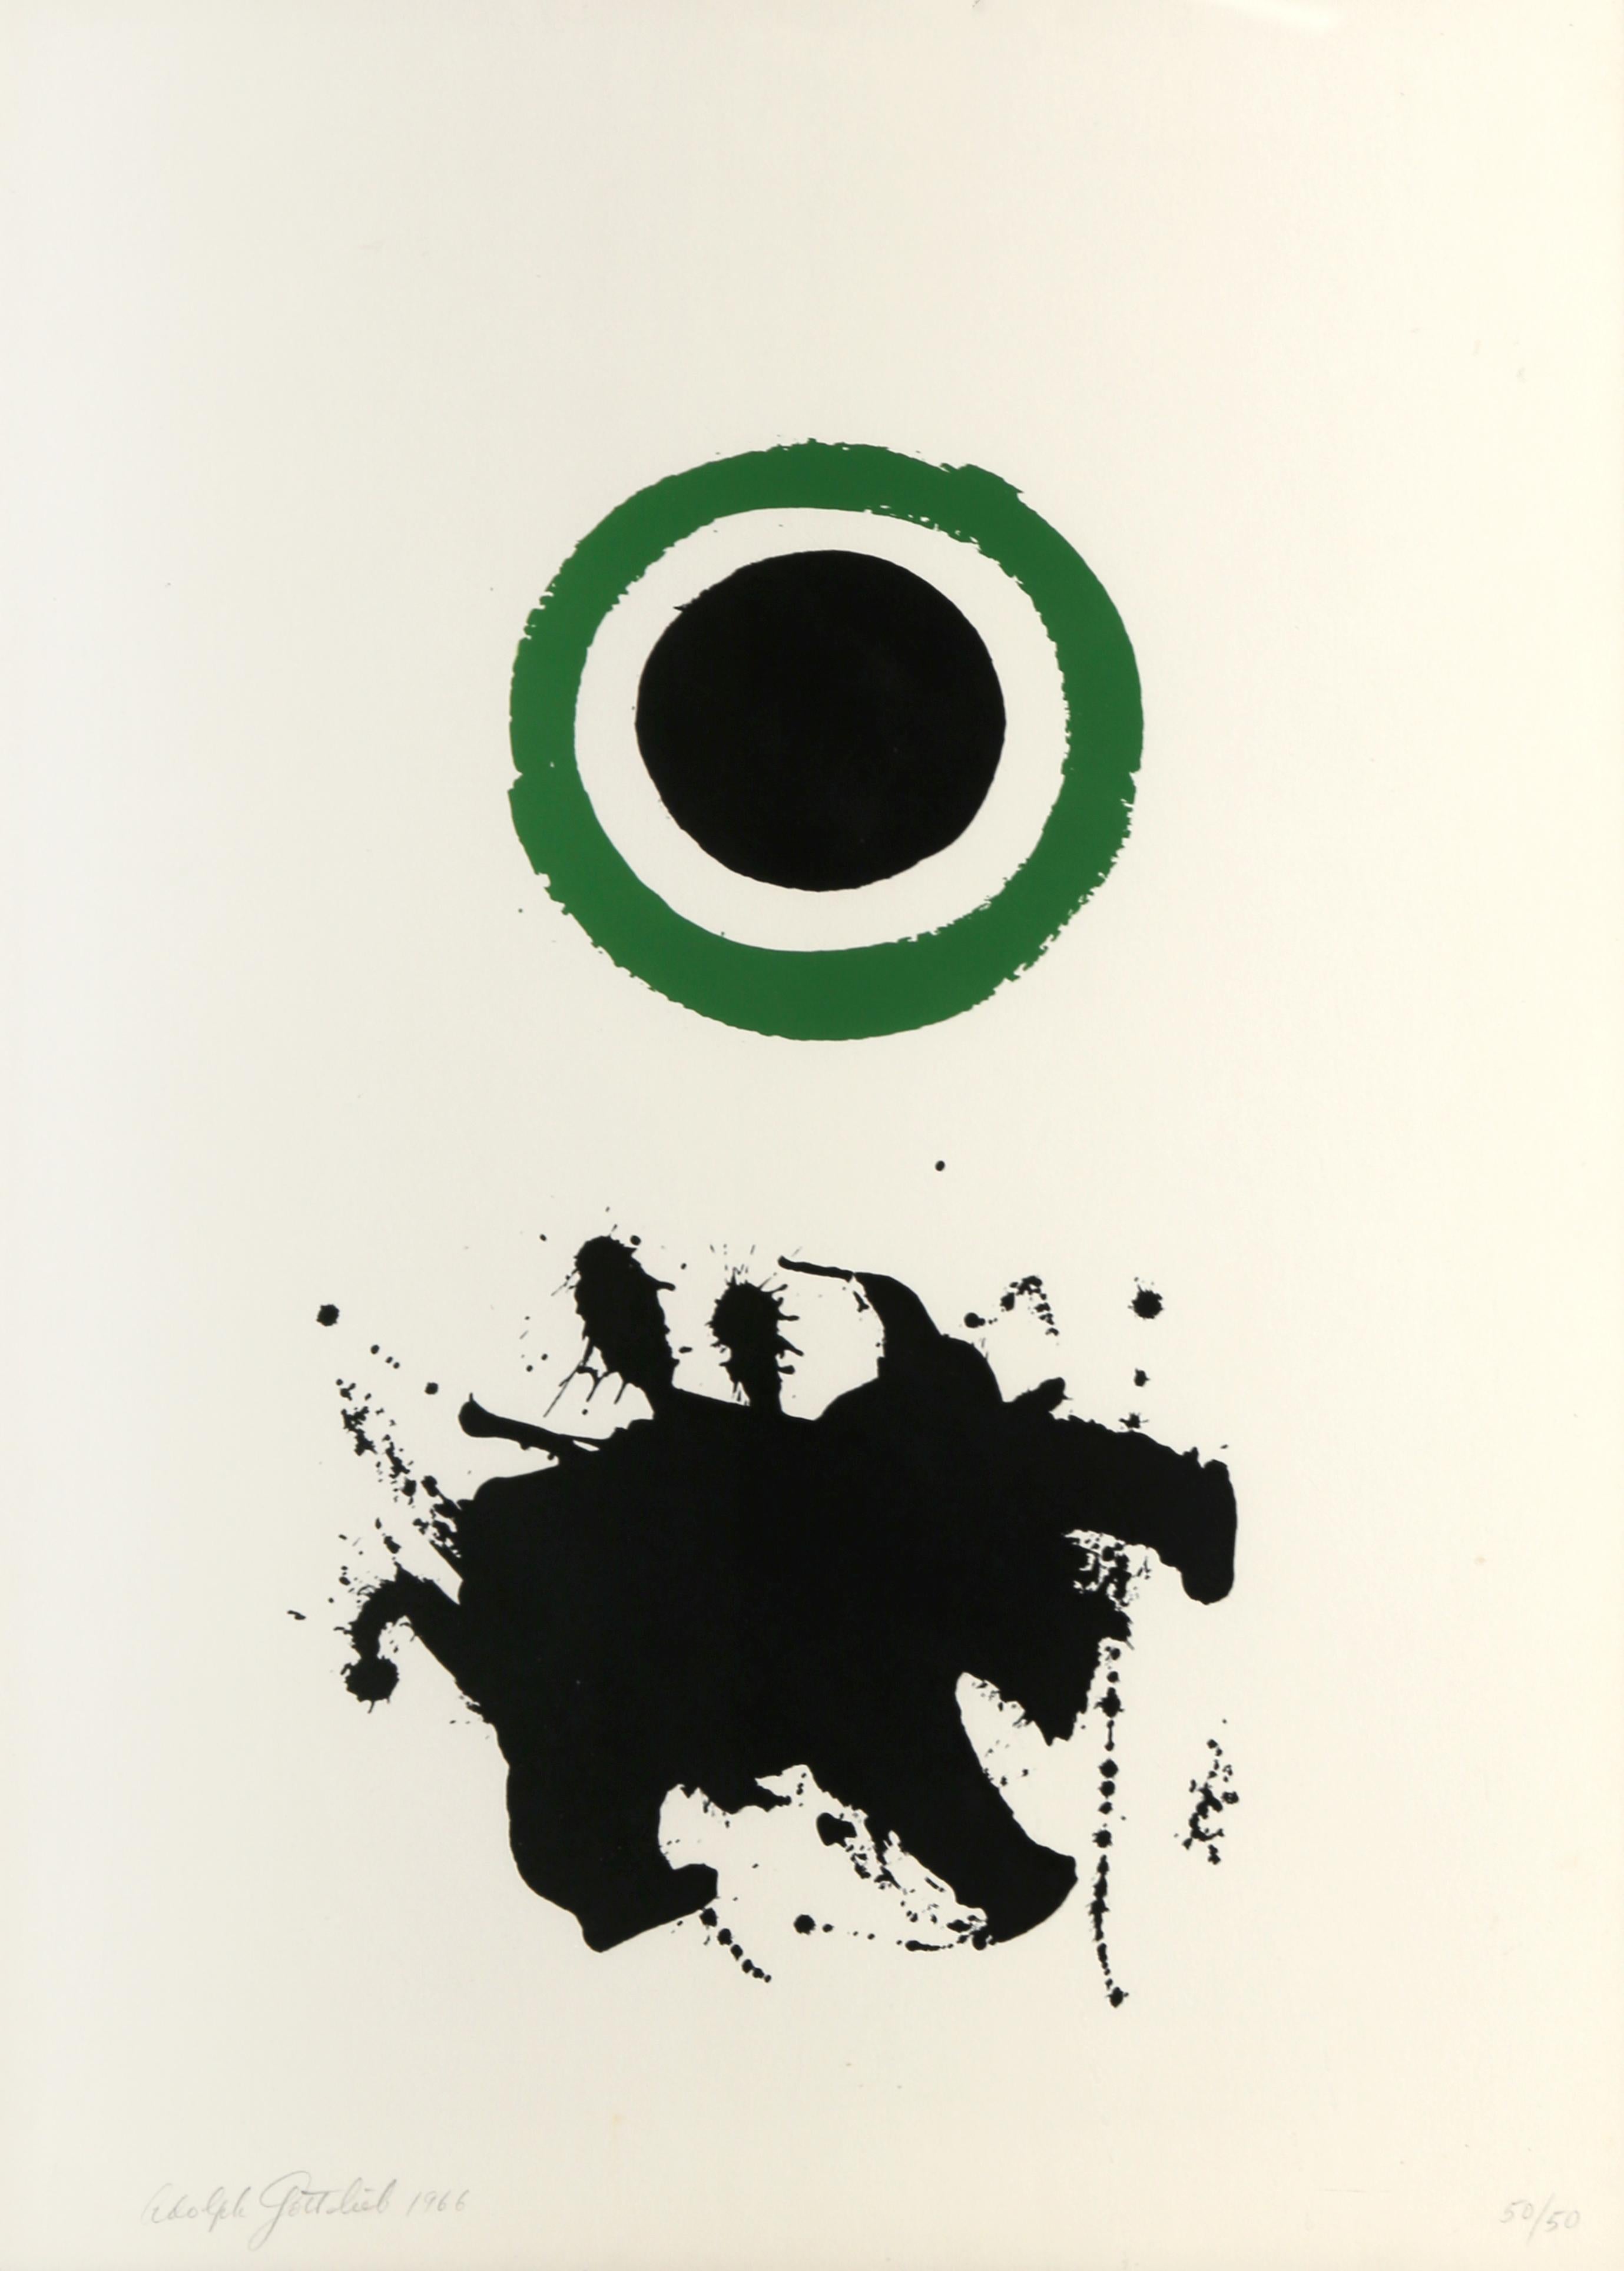 An original silkscreen by American Abstract Expressionist, Adolph Gottlieb.  It is hand-signed and numbered from the edition of 50.  

Artist: Adolph Gottlieb
Title: Halo 
Year: 1966
Medium: Silkscreen, signed and numbered in pencil
Edition: